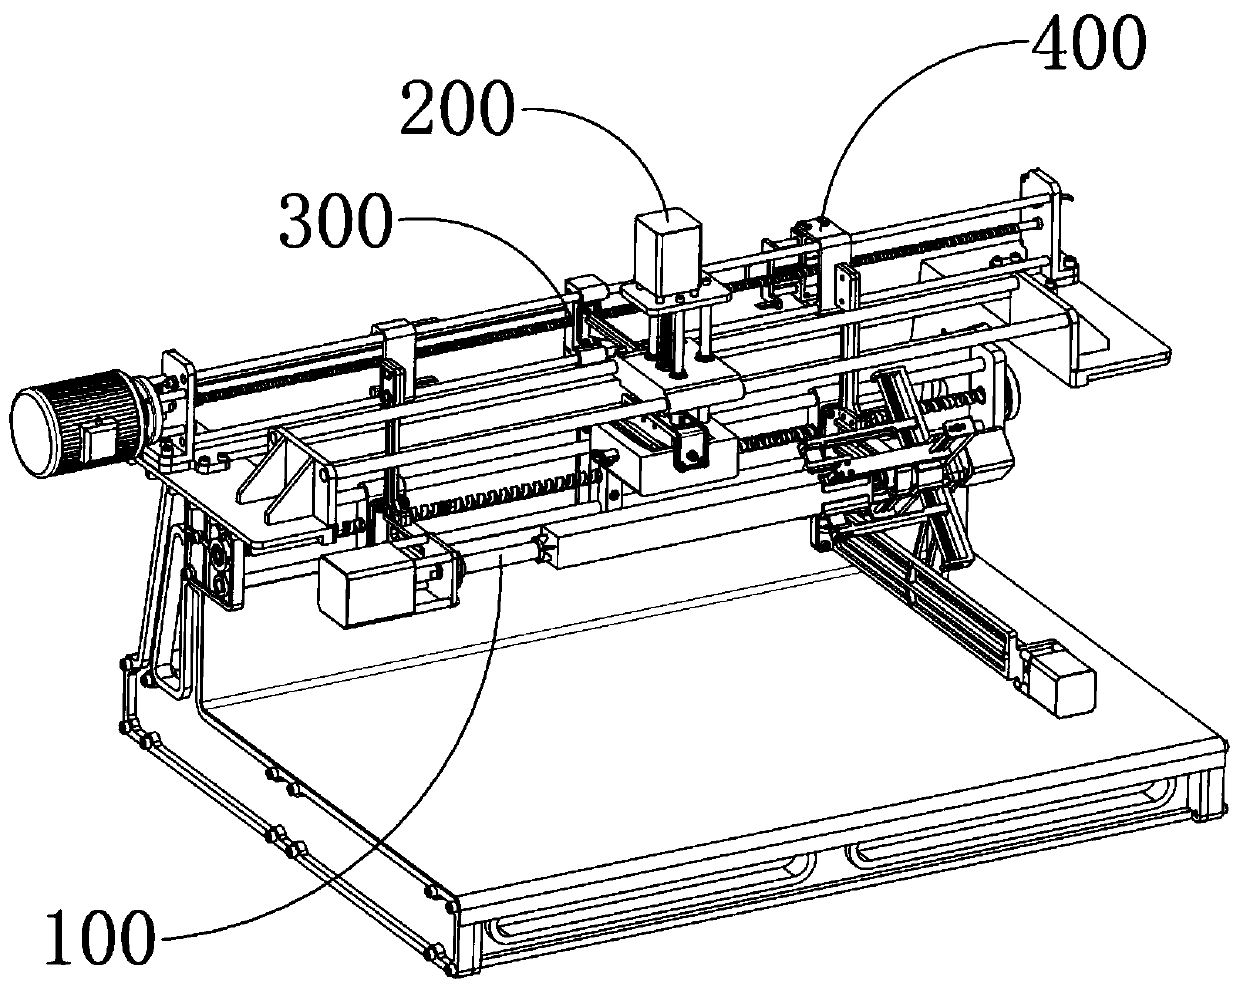 Numerical control machine tool for wood processing